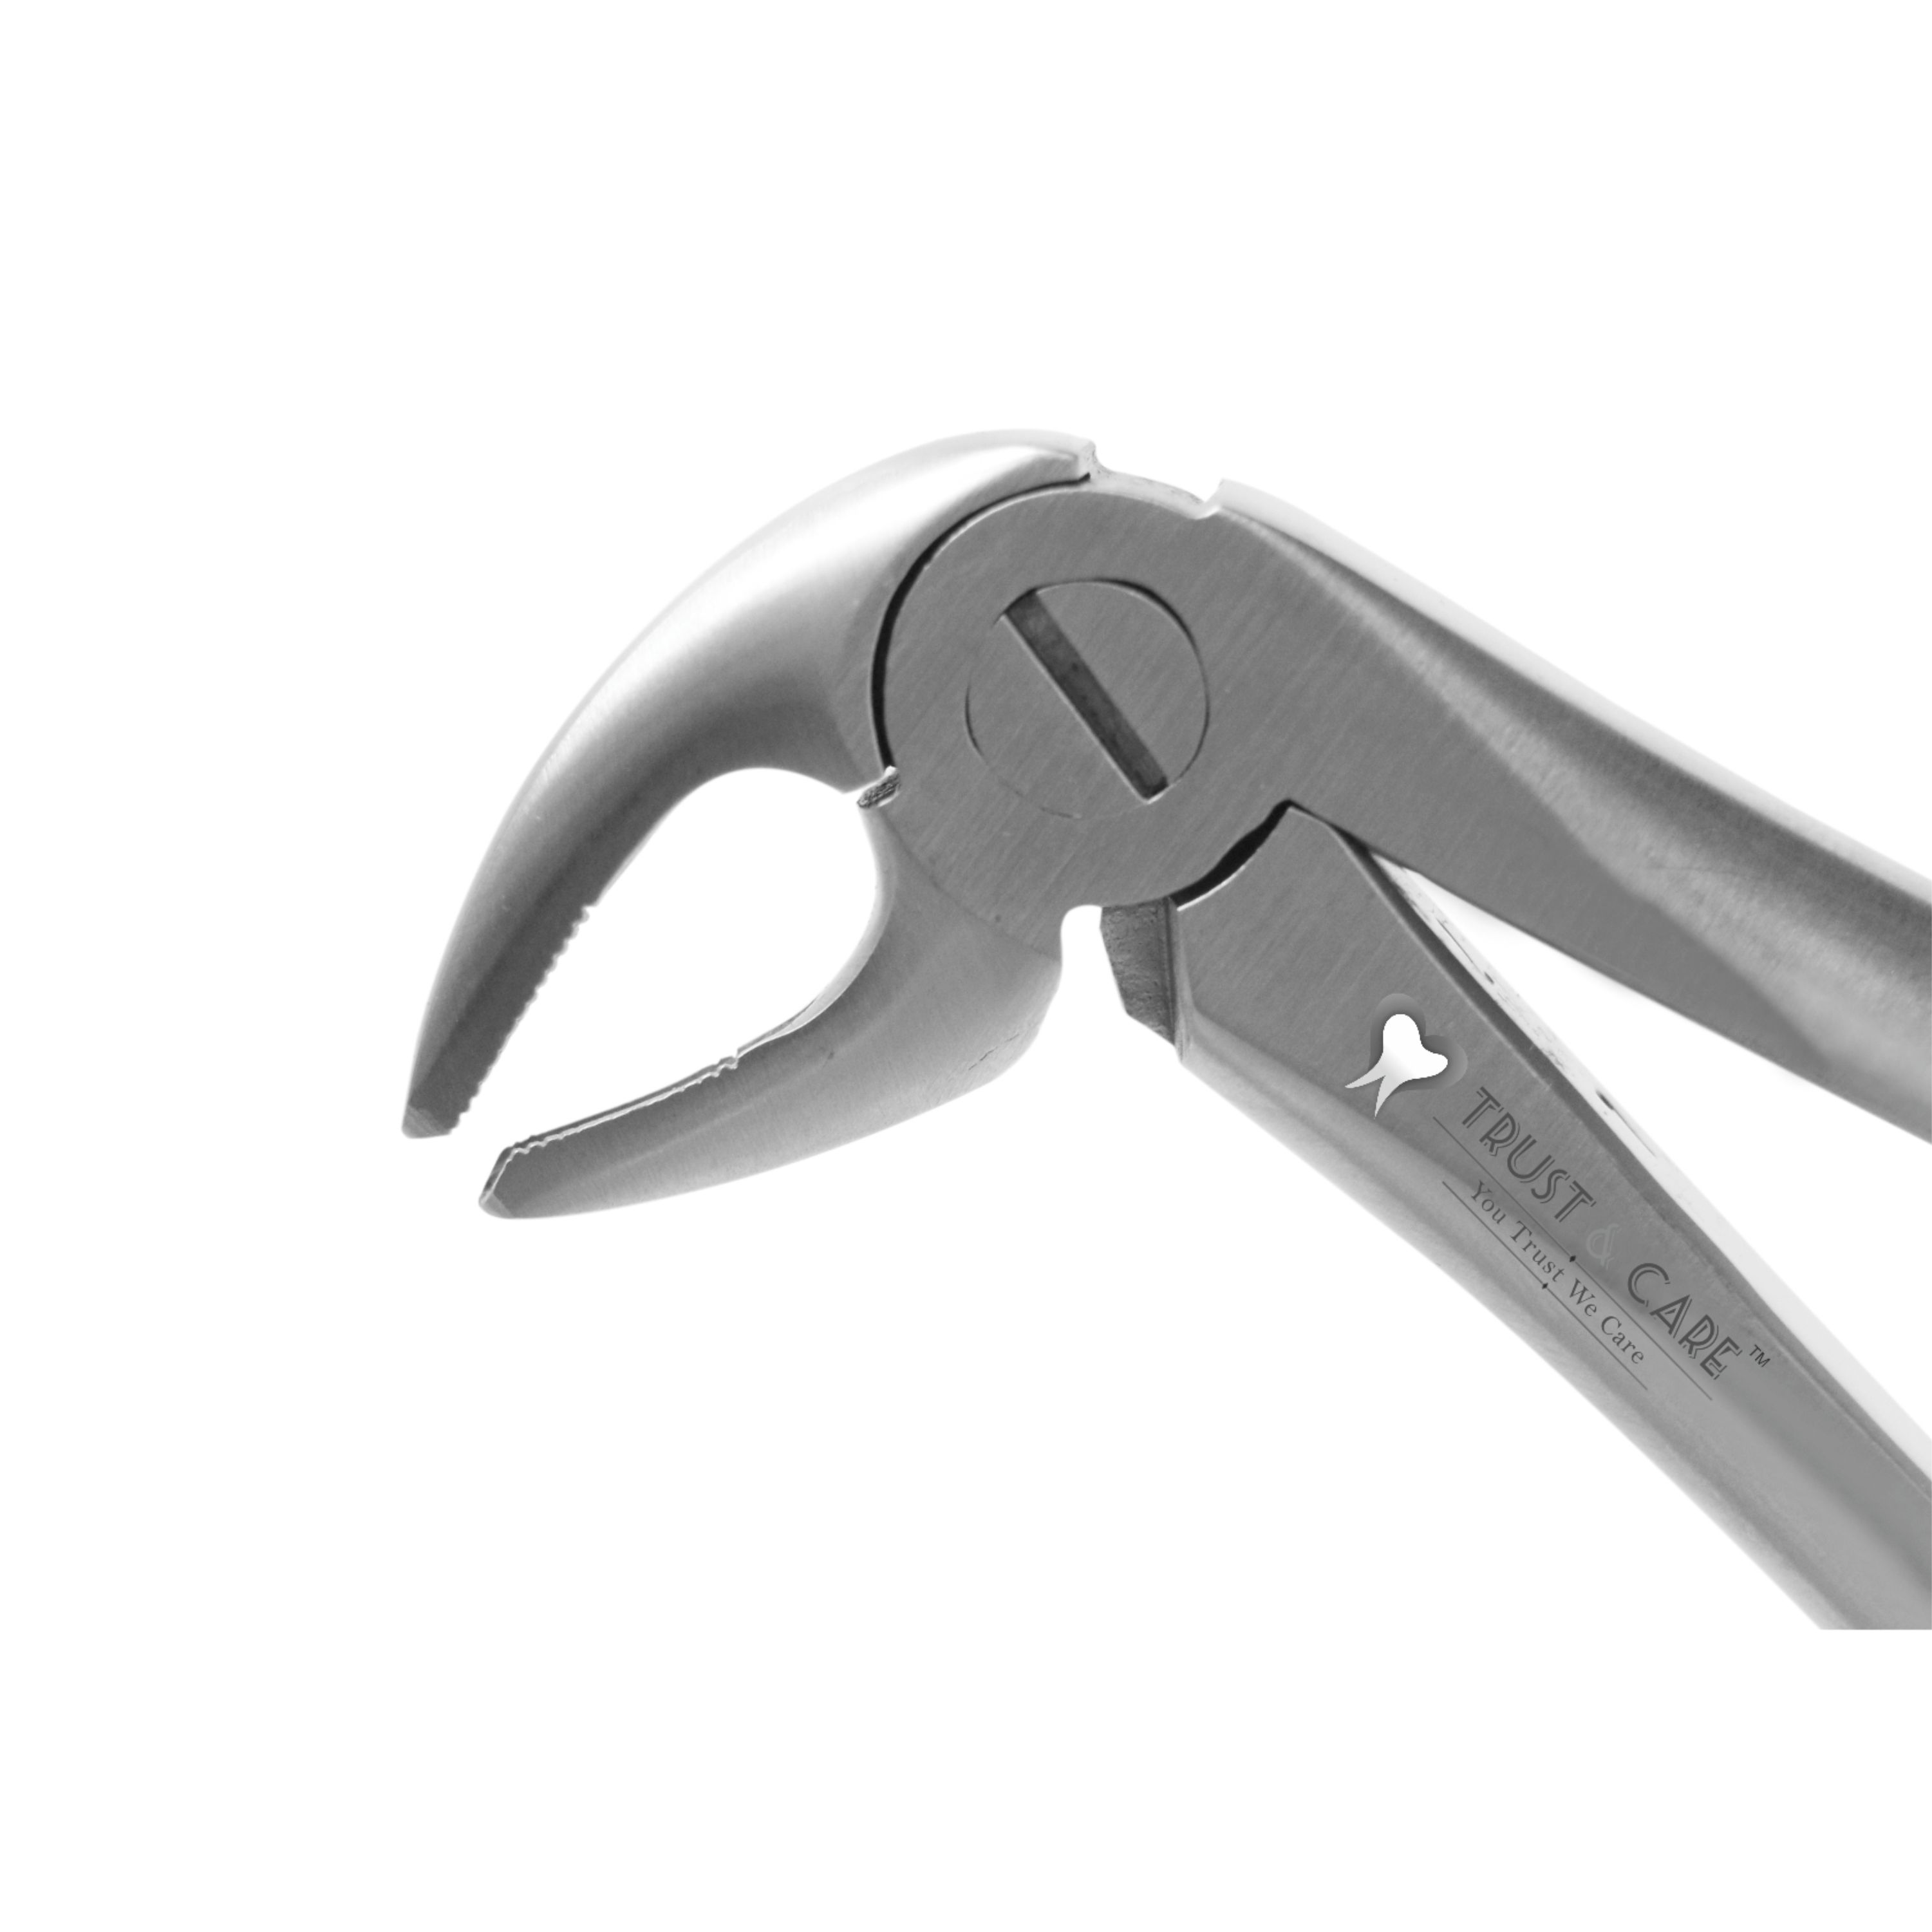 Trust & Care Tooth Extraction Forcep Lower Premolars Fig No. 13 Premium